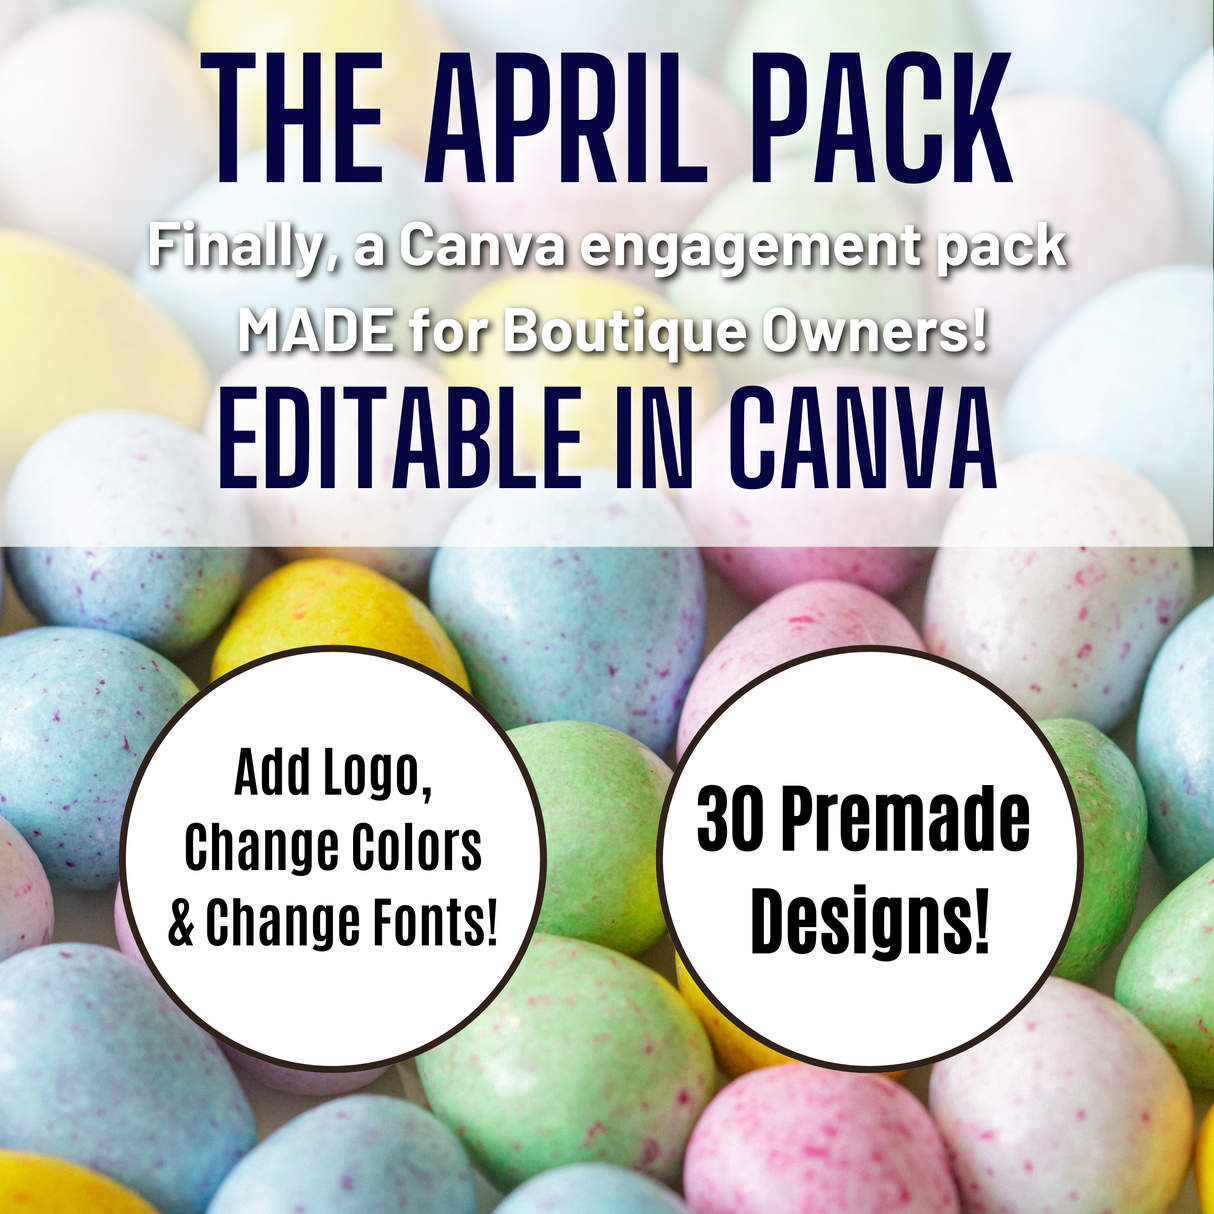 April Engagement Pack * DEAL OF THE DAY